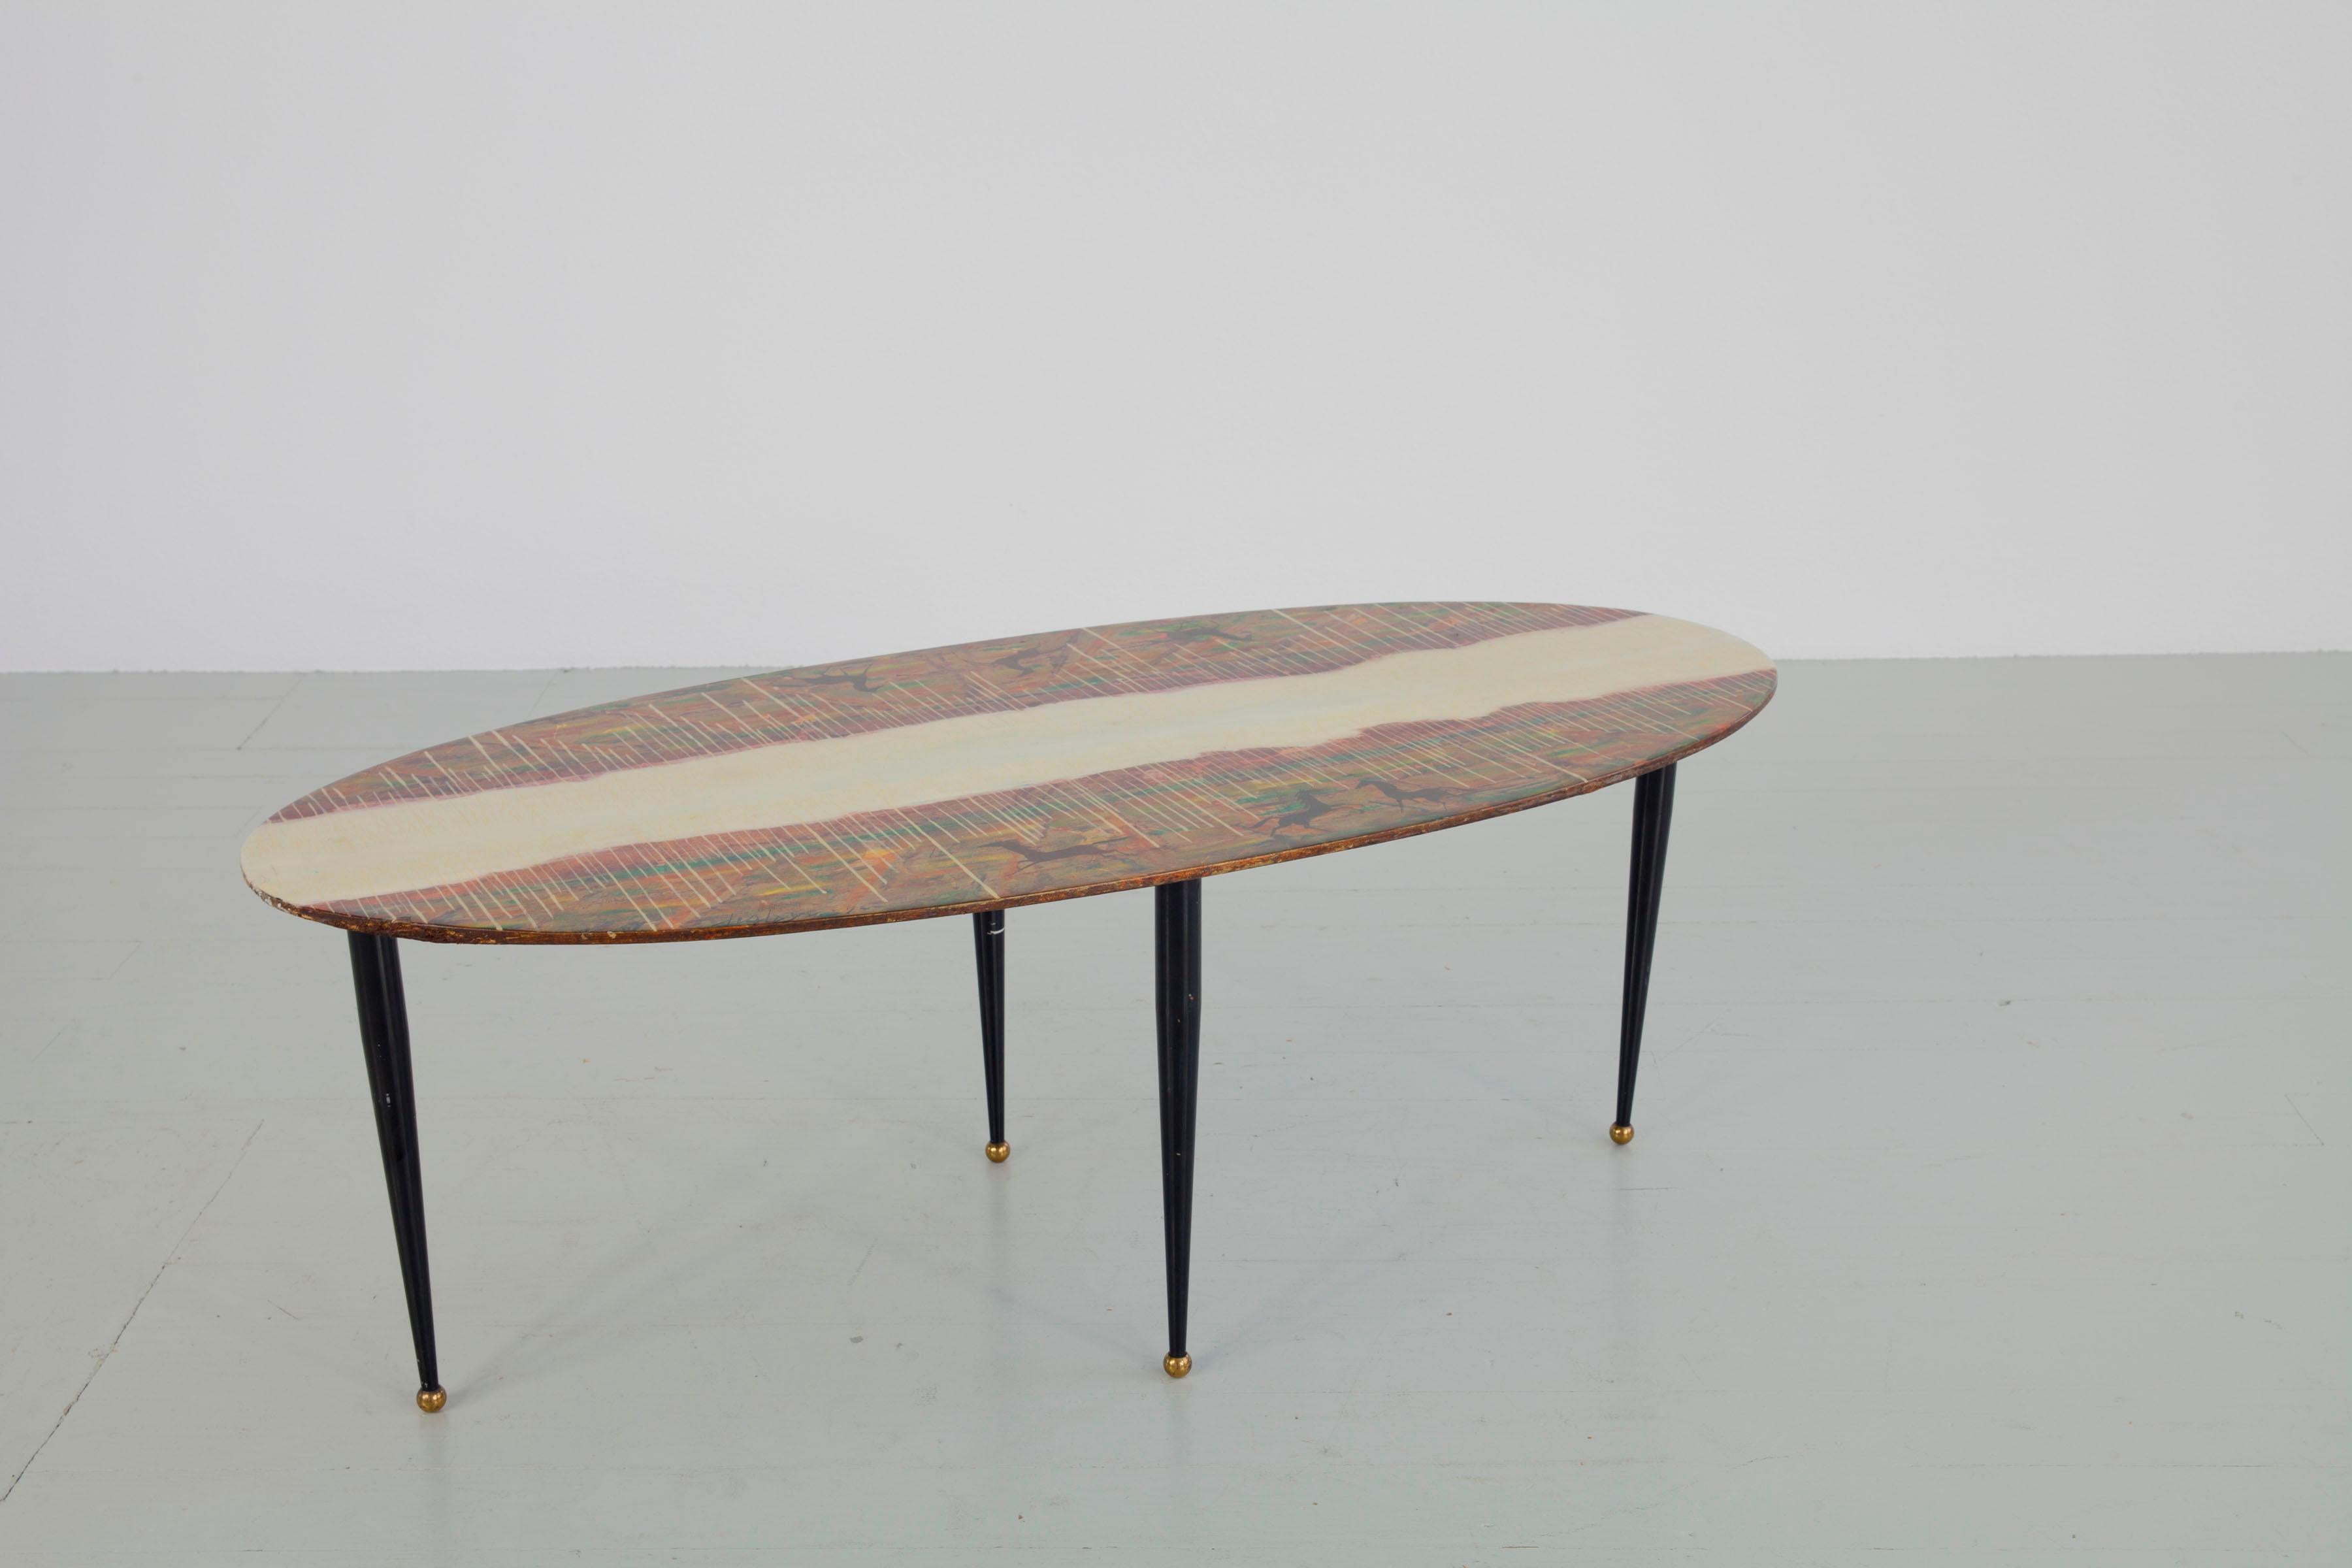 Blackened Decalage Italian Hand-Painted Coffee Table with hand-painted wooden plate, 1950